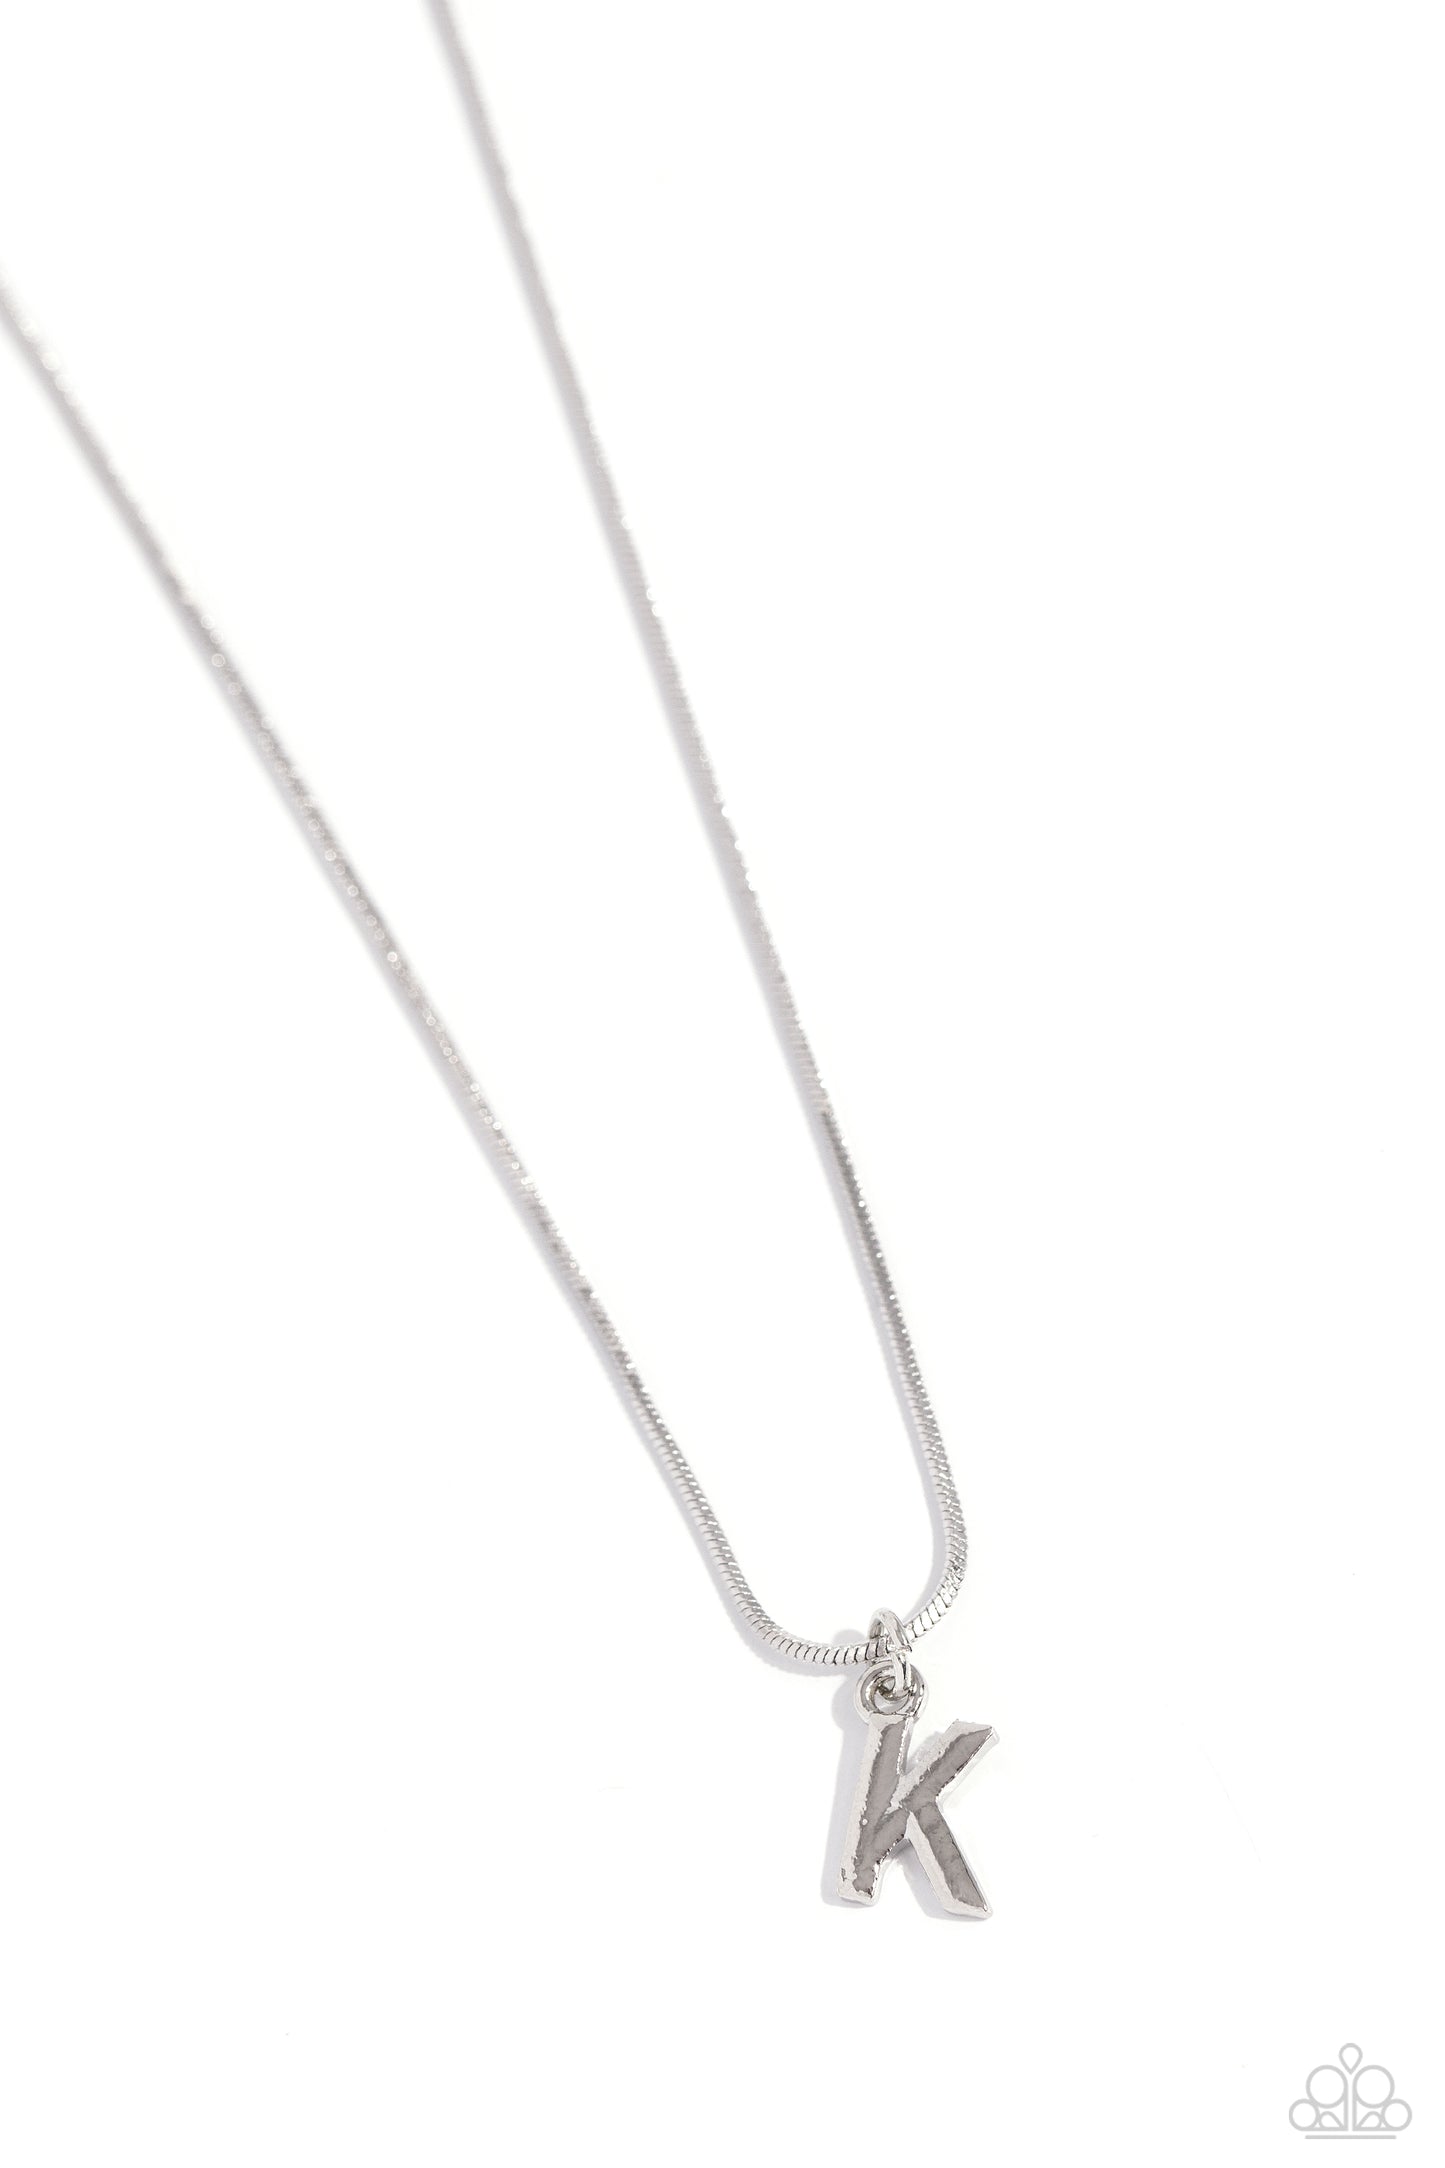 Seize the Initial - Silver - K Necklace